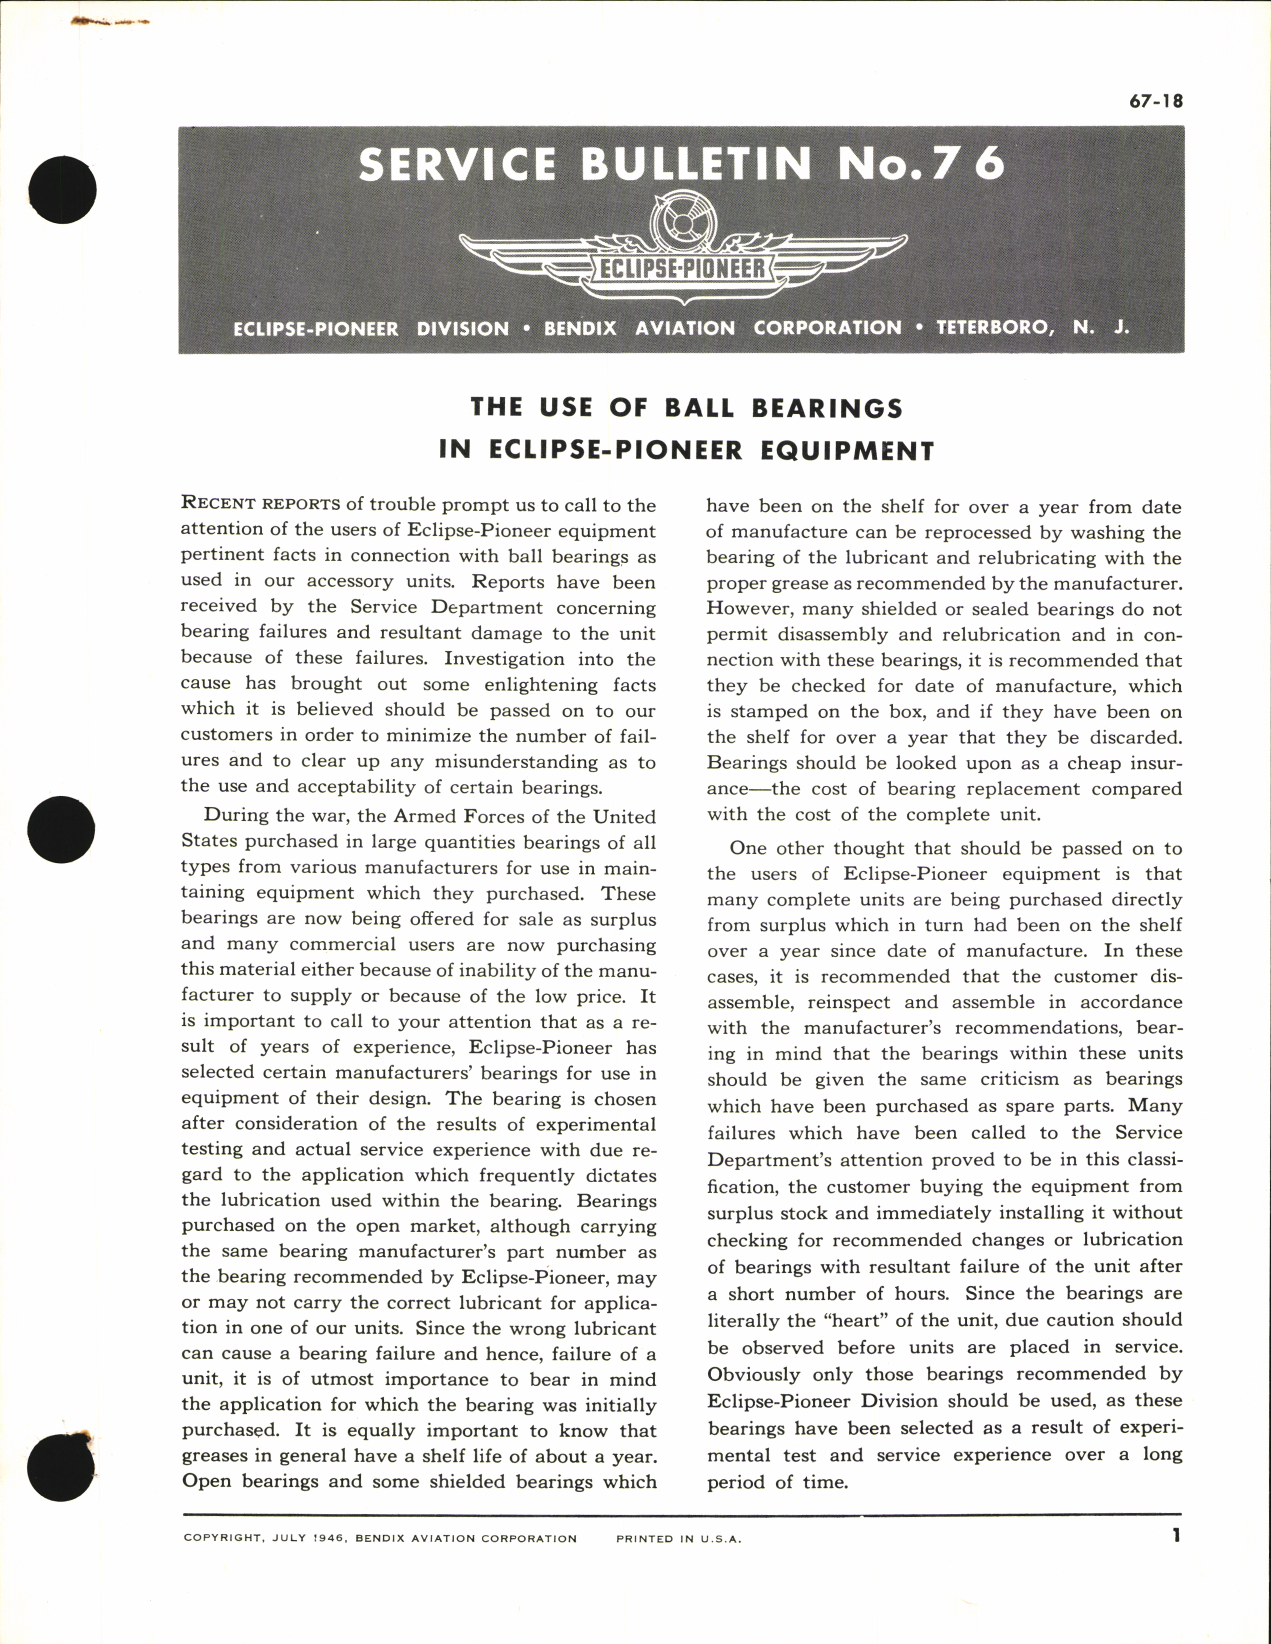 Sample page 1 from AirCorps Library document: The Use of Ball Bearings in Eclipse-Pioneer Equipment